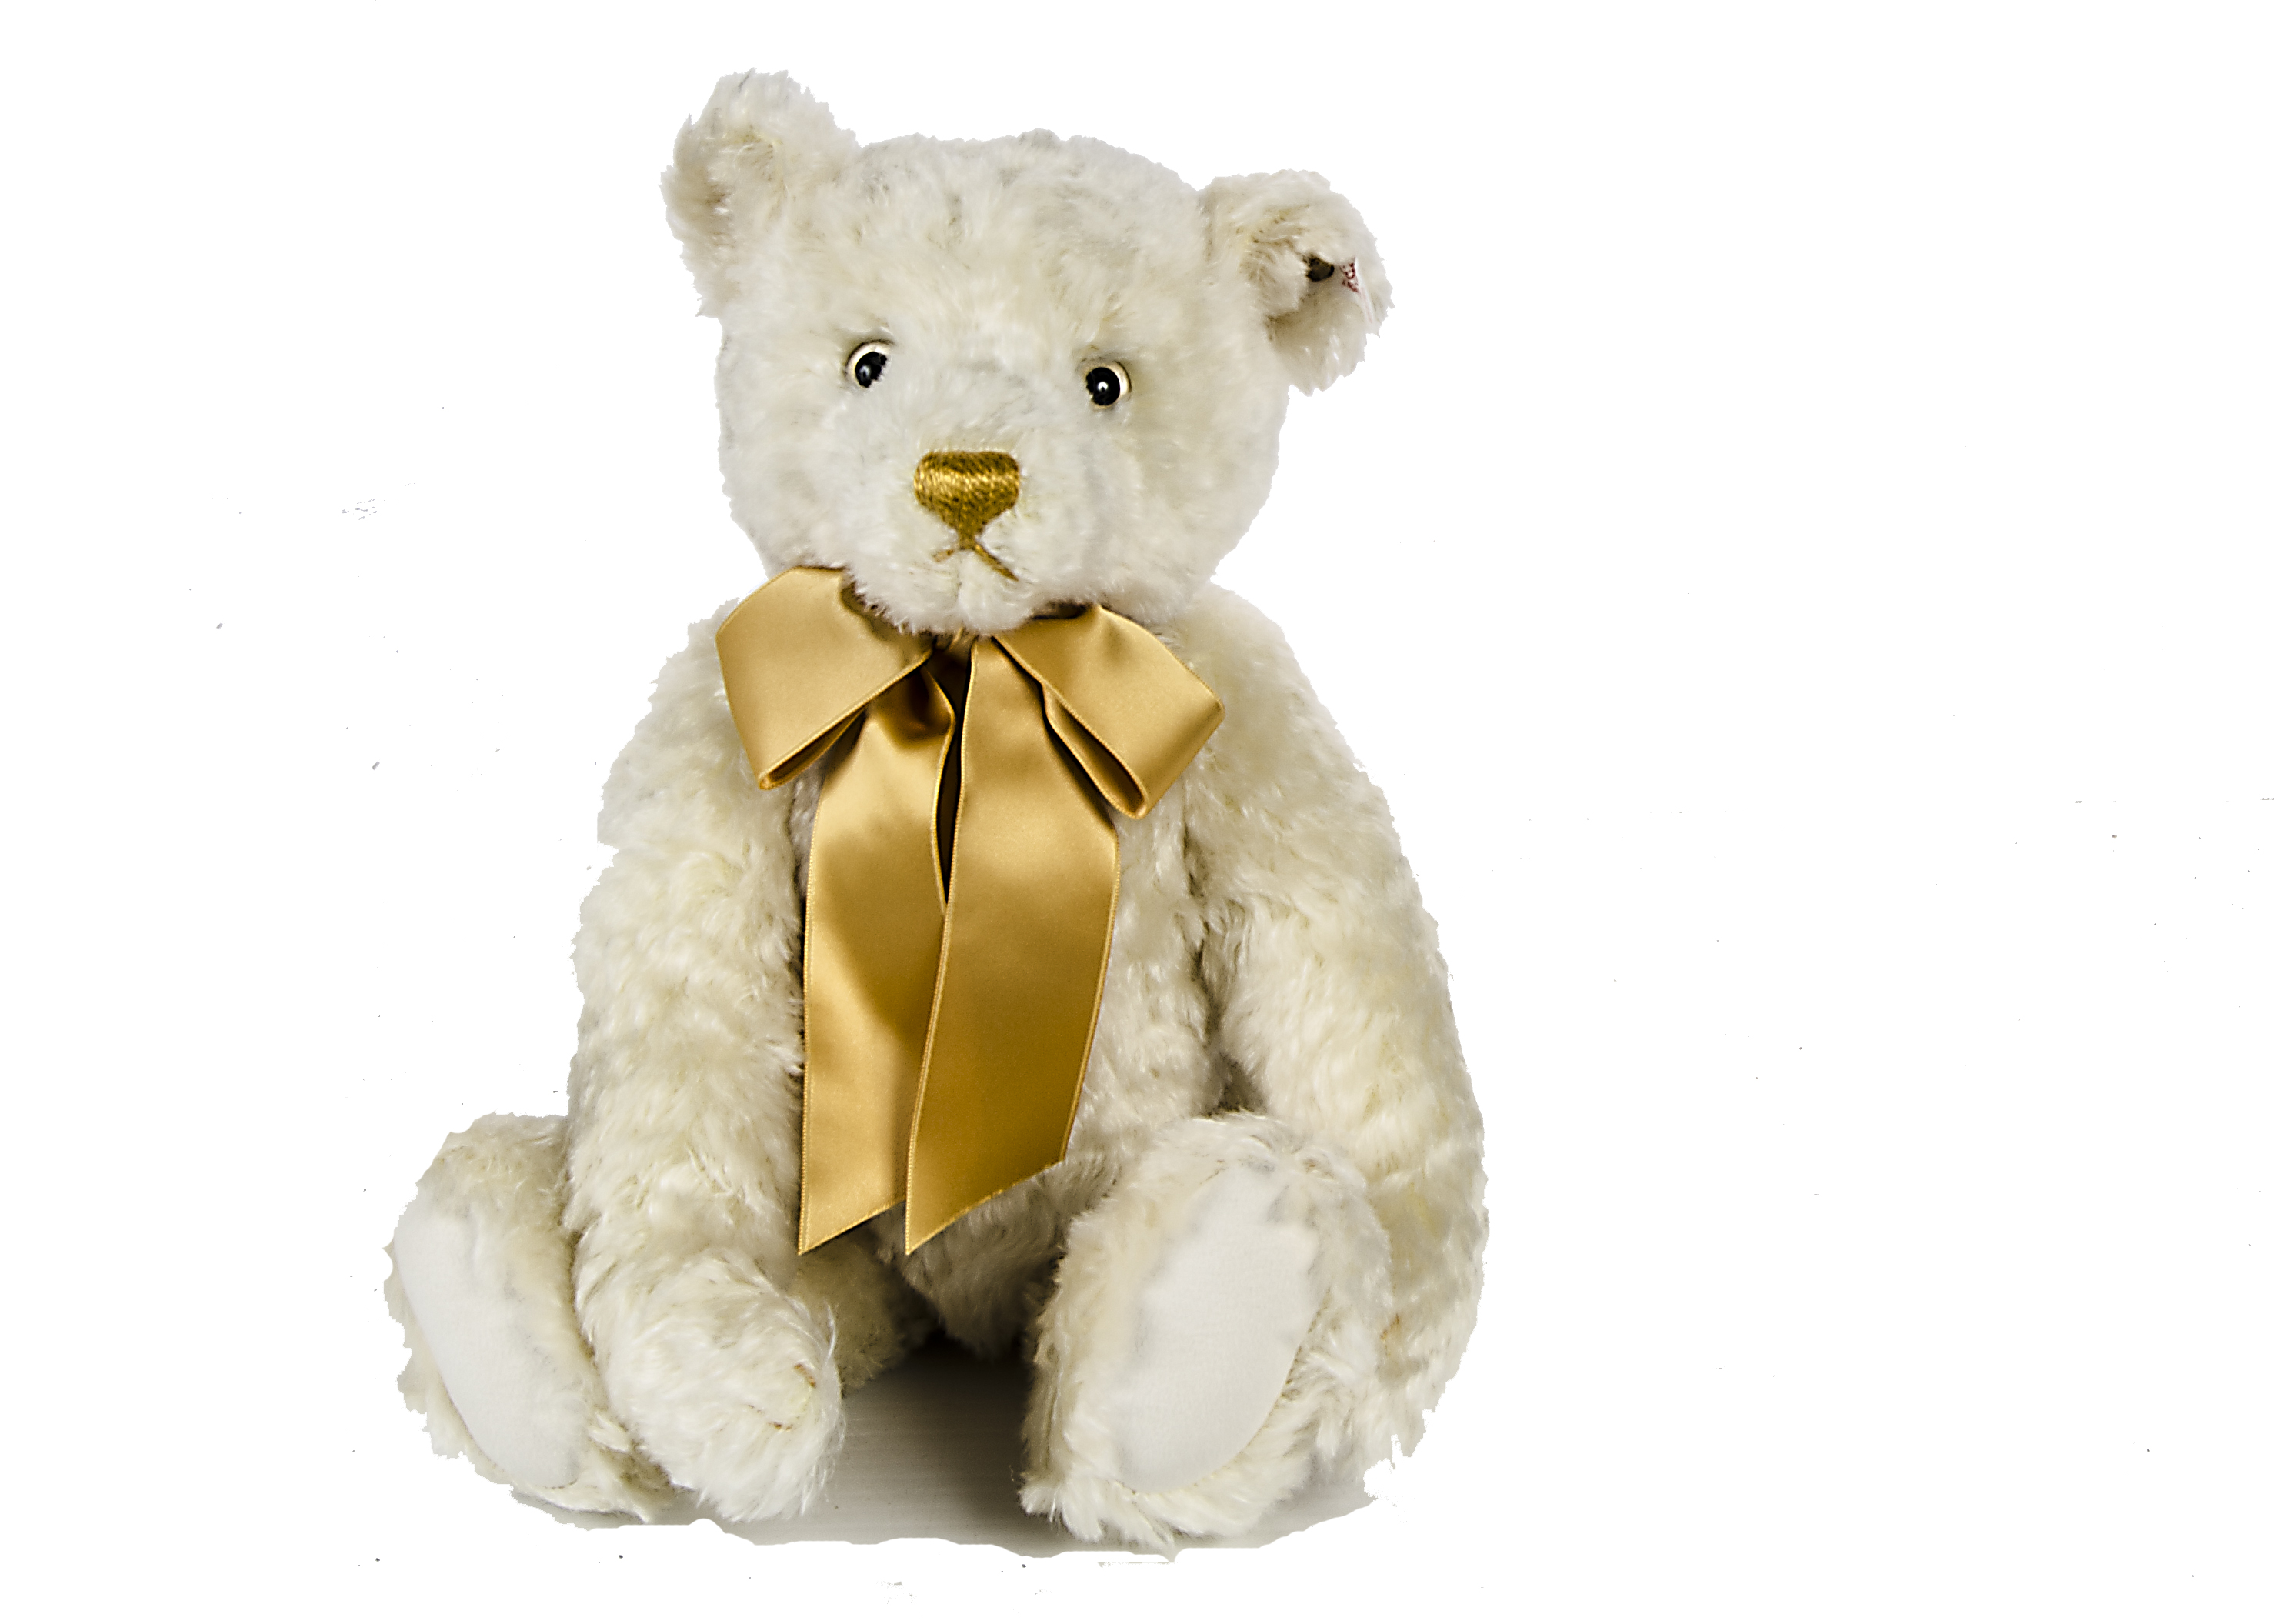 A Steiff British Collector’s 2000 Teddy Bear, 1606 of 4000, in original box with certificate